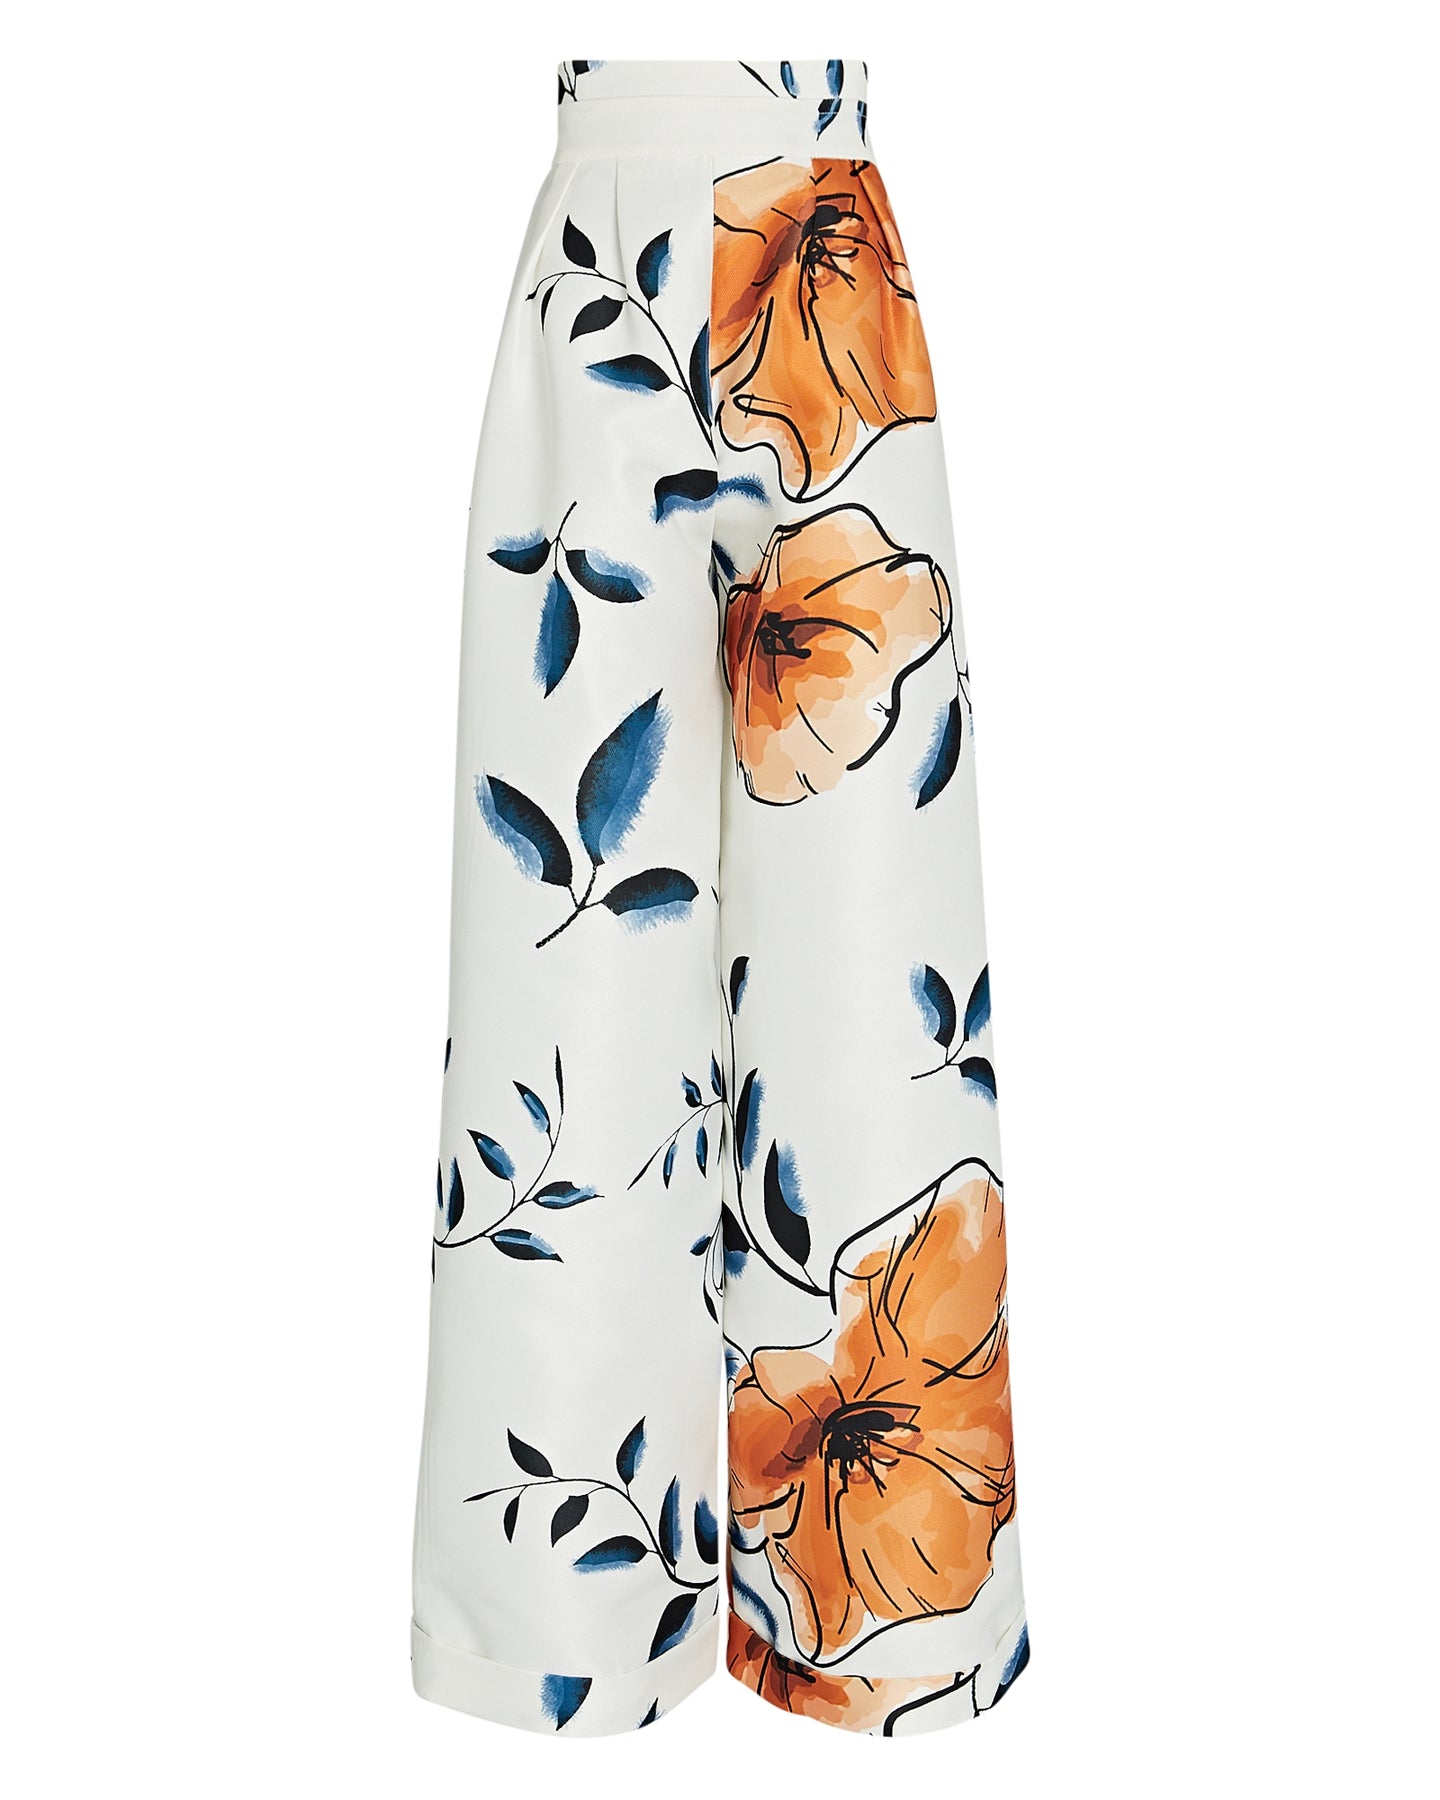 White long and flowy high-waited pants with navy vines and orange flowers on them. Available at Saks Fifth Avenue.